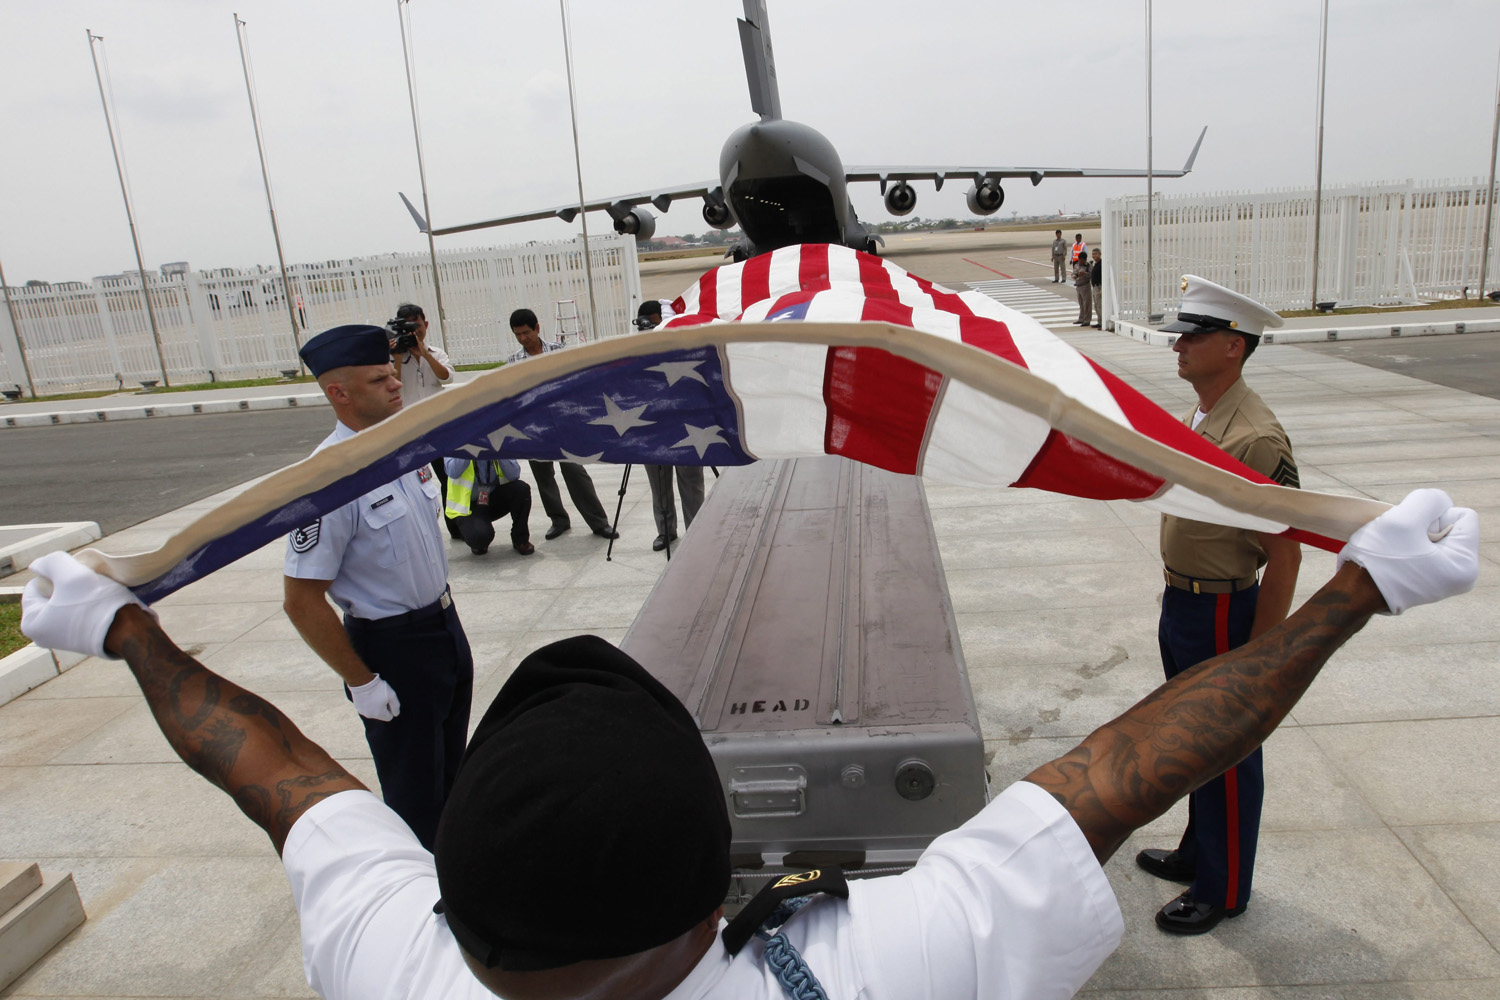 Apr. 2, 2014. US service personnel cover a coffin with a US flag during a repatriation ceremony at Phnom Penh International airport, Cambodia.  Cambodia and the US conducted a repatriation ceremony to honor the recovery of possible remains believed to belong to missing US military service members found.